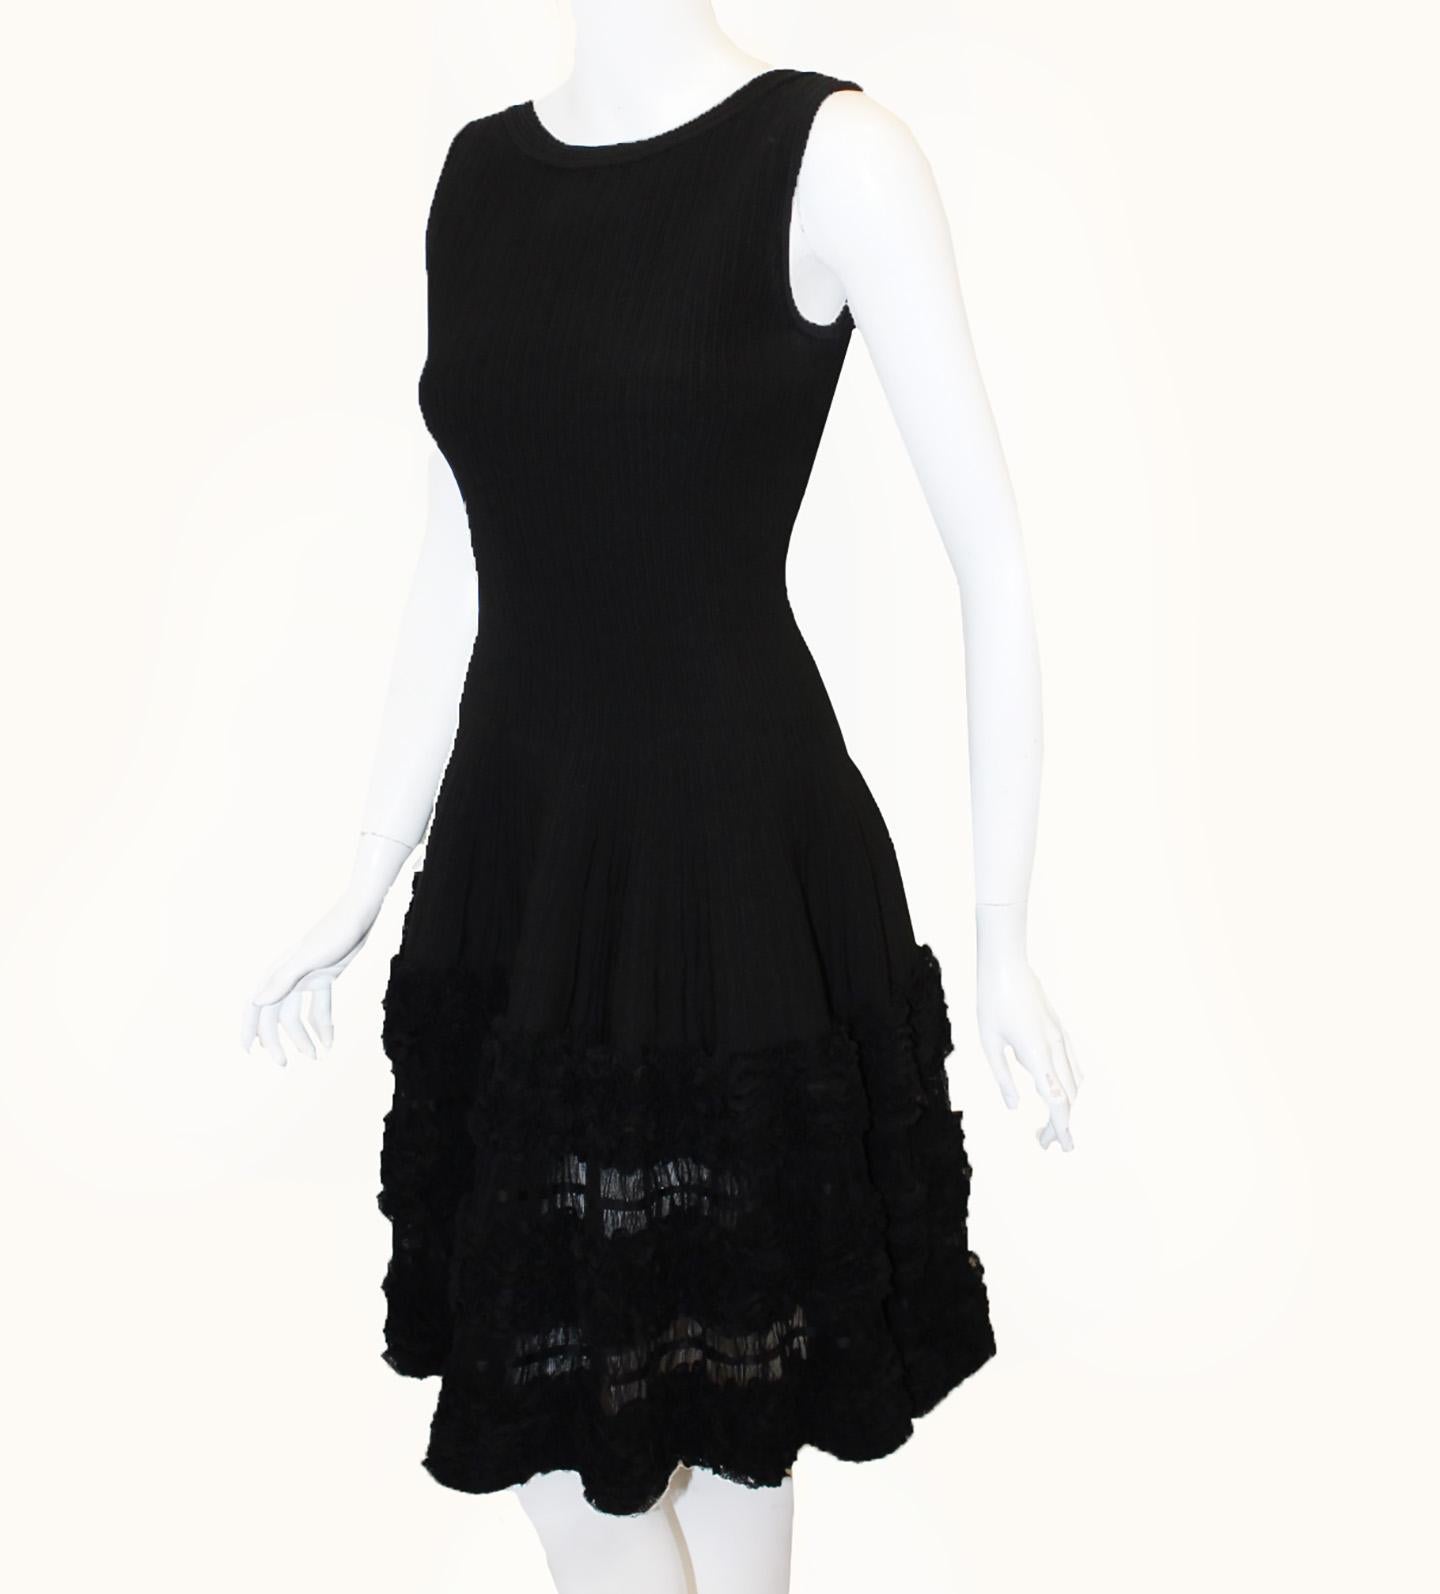 Alaïa's black sleeveless silk blend dress radiates sexiness with the low cut back and with the layered lace ruffle ballerina style appliques, this flirty dress reflects your feminine aesthetic!  This dress is not lined.  It is in excellent